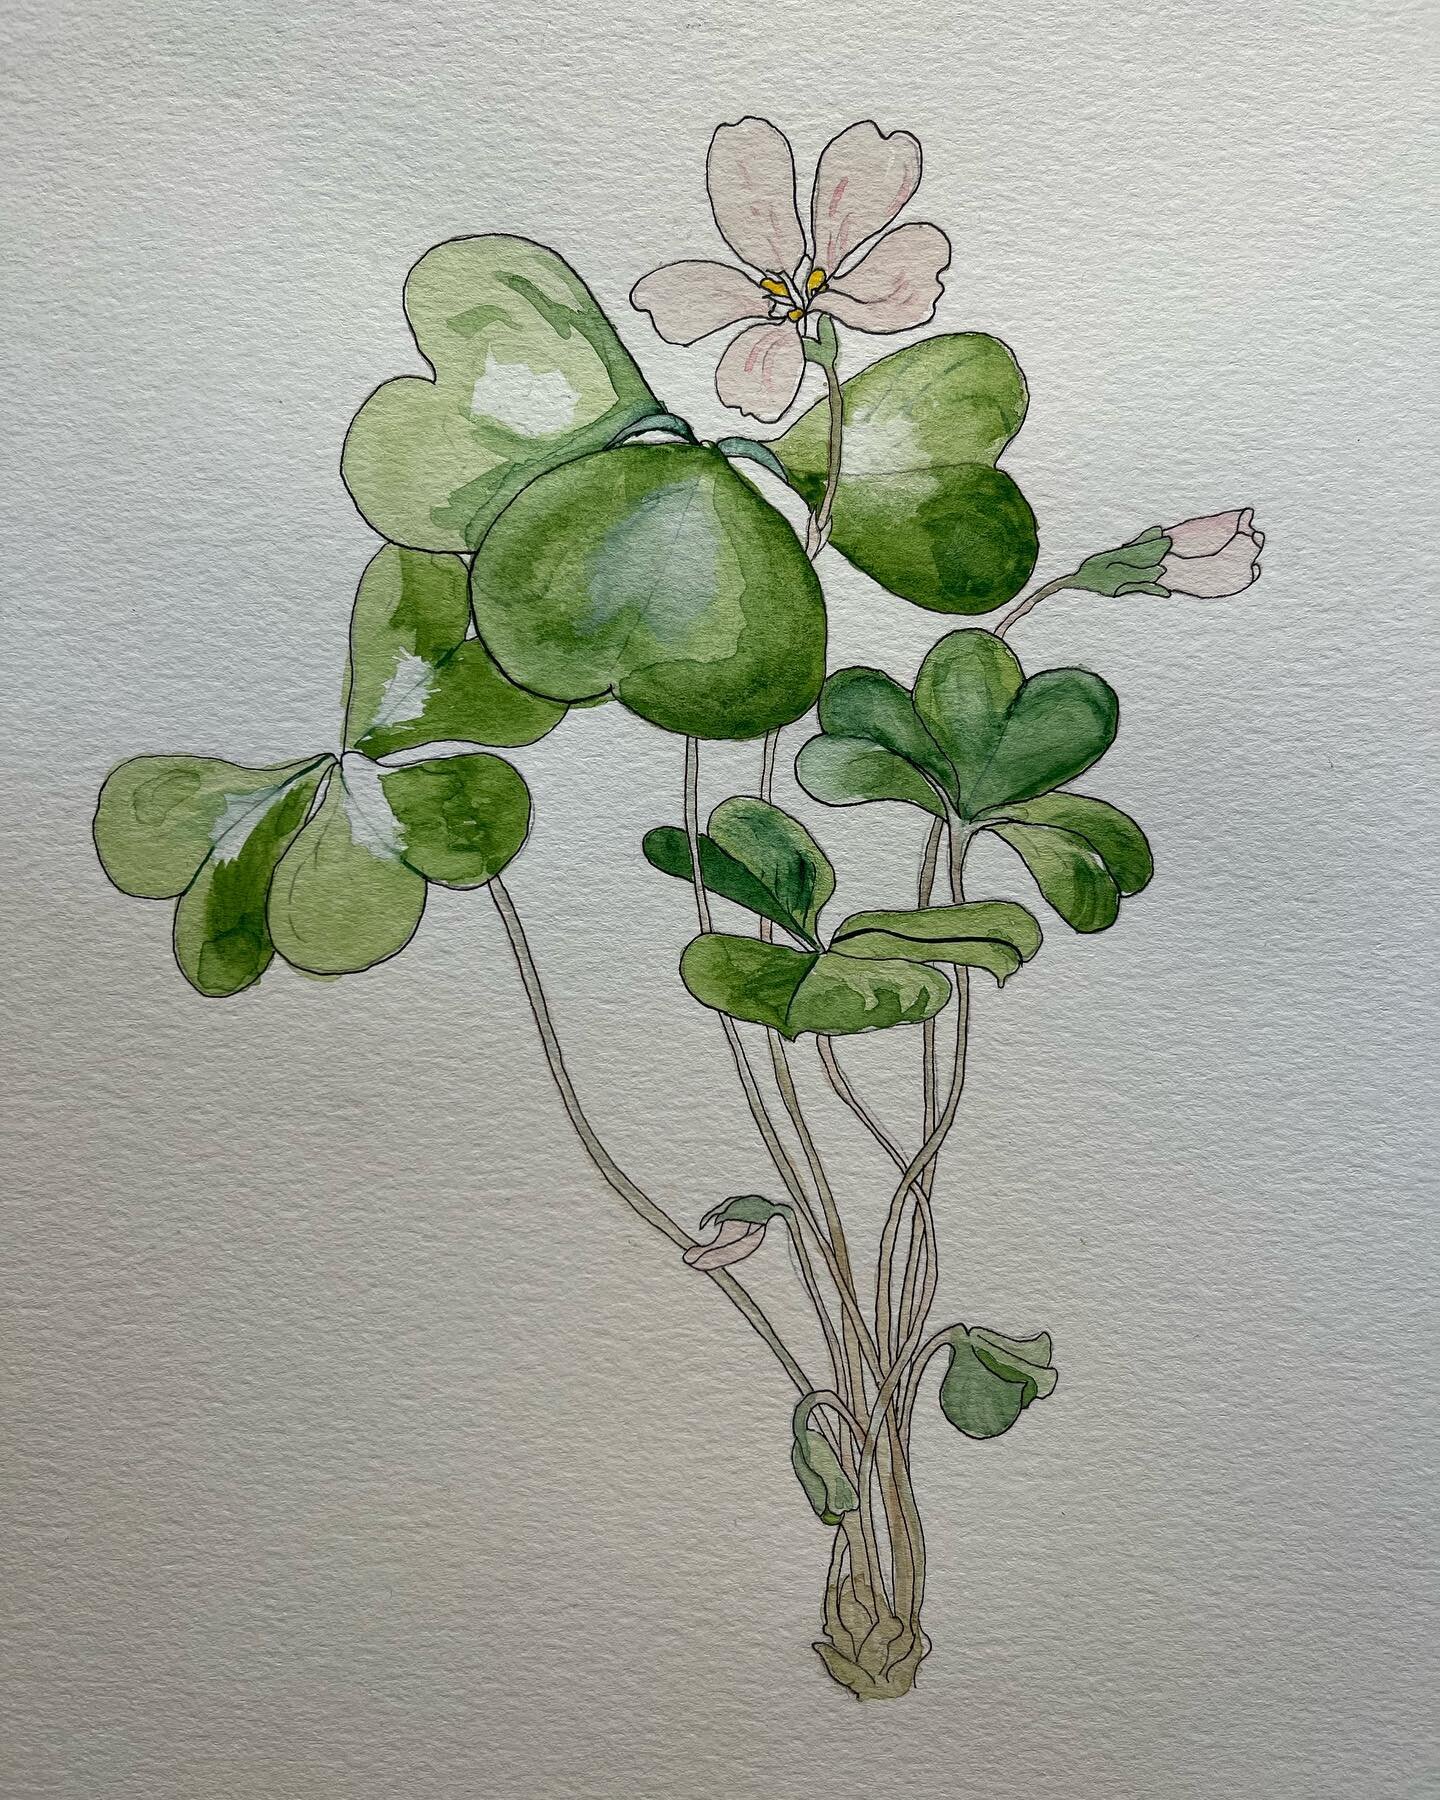 New wines coming this fall! Here&rsquo;s a watercolor of redwood sorrel I just finished for a new Santa Cruz Mountains vineyard